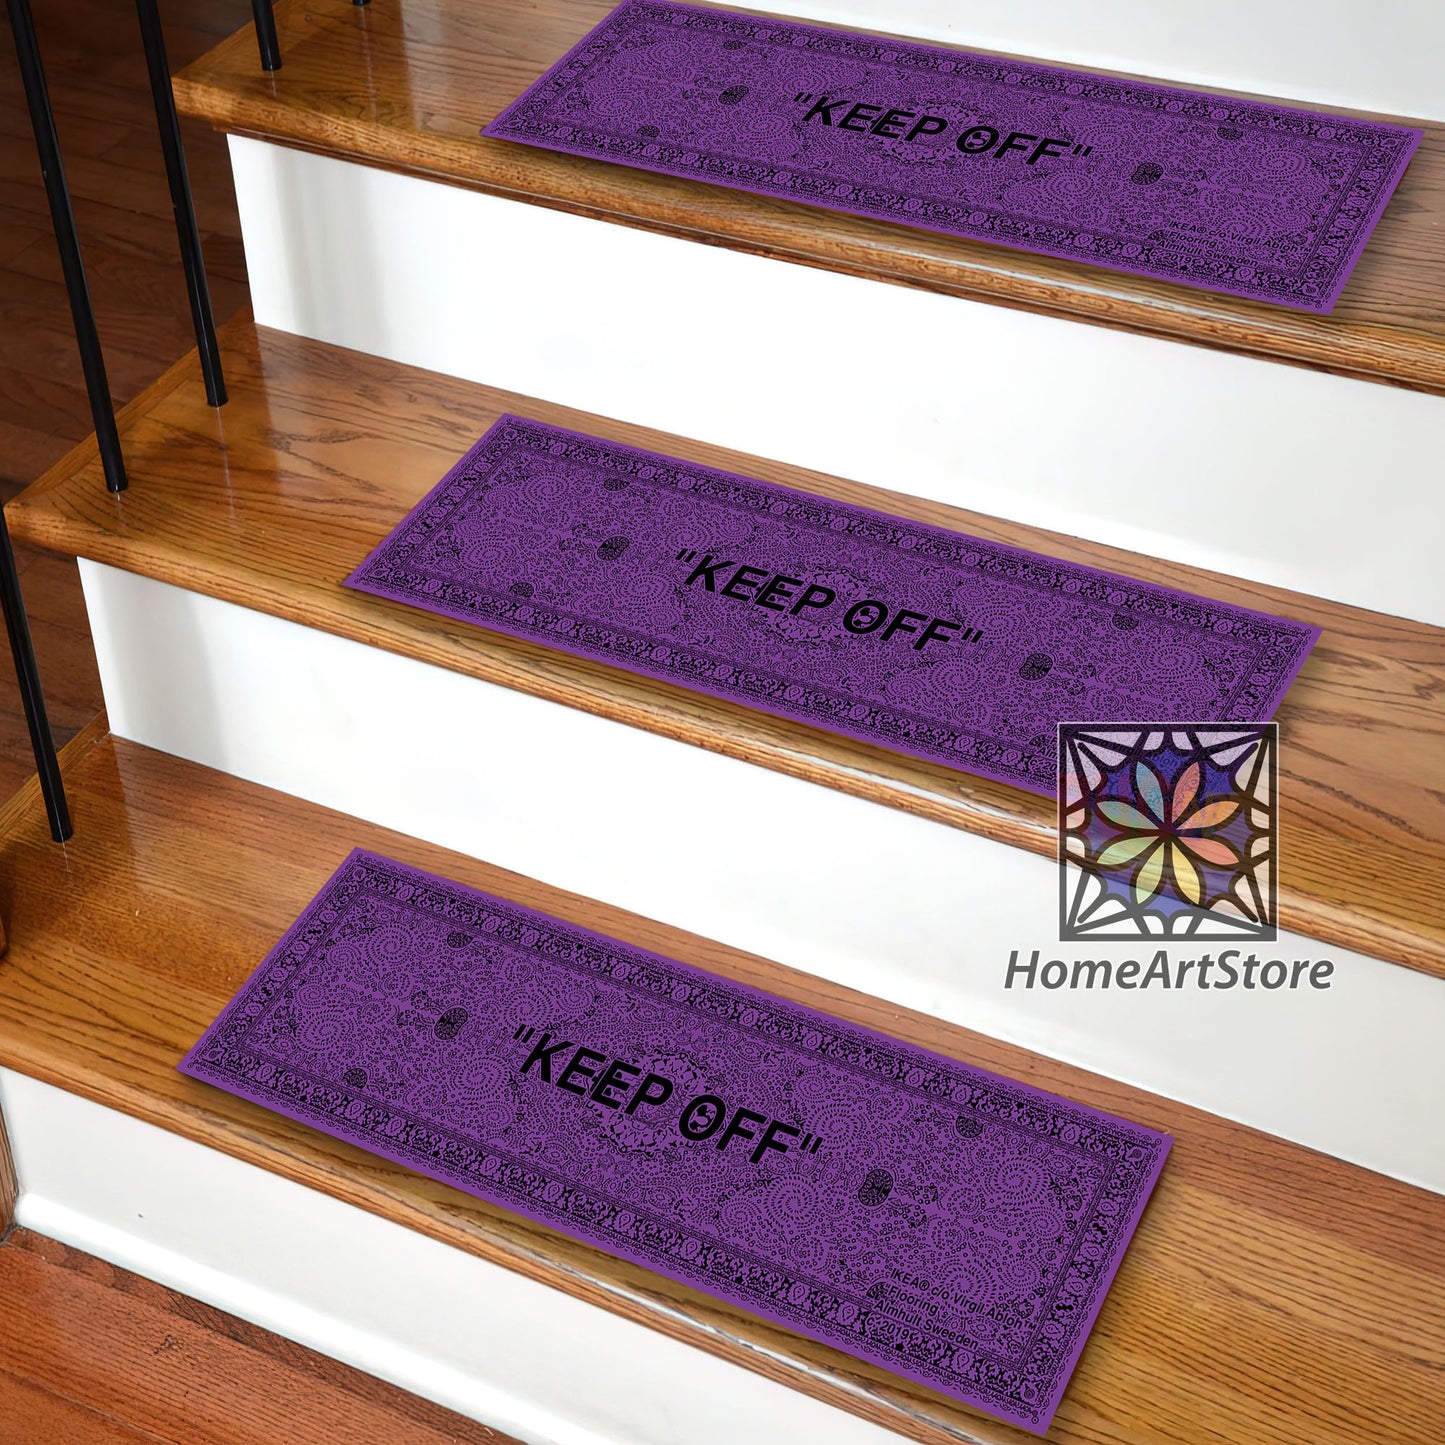 Keep Off Stair Step Rugs, Purple and Black Keepoff Stair Mats, Hypebeast Decor, Sneaker Stair Rugs, Street Fashion